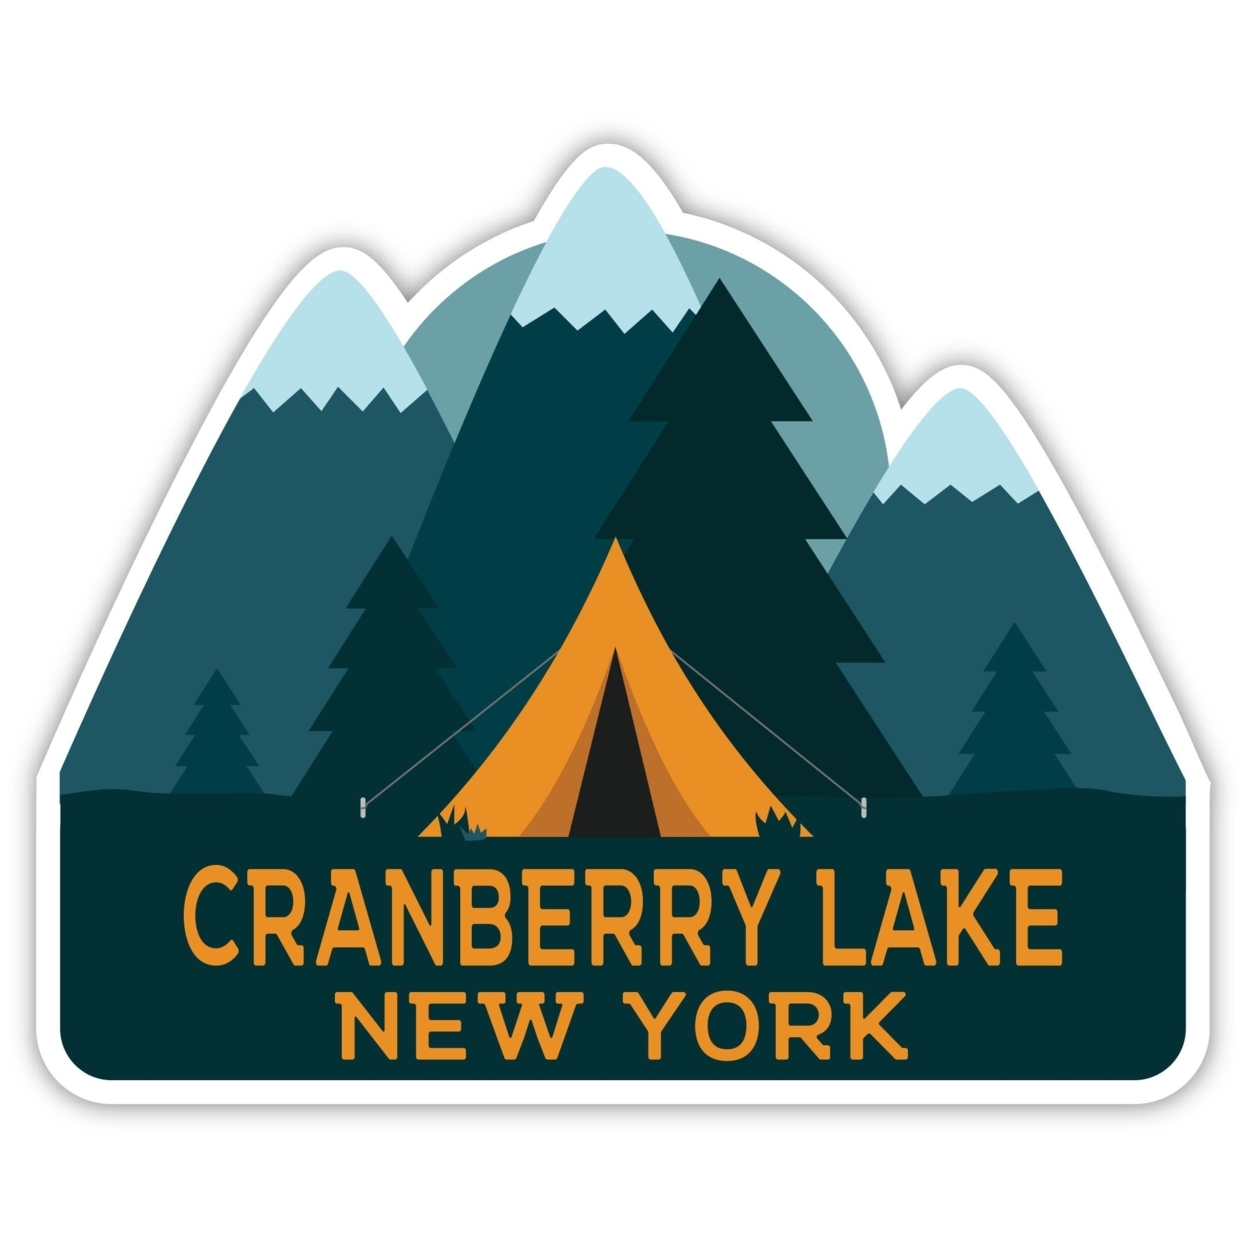 Cranberry Lake New York Souvenir Decorative Stickers (Choose Theme And Size) - 4-Pack, 12-Inch, Camp Life